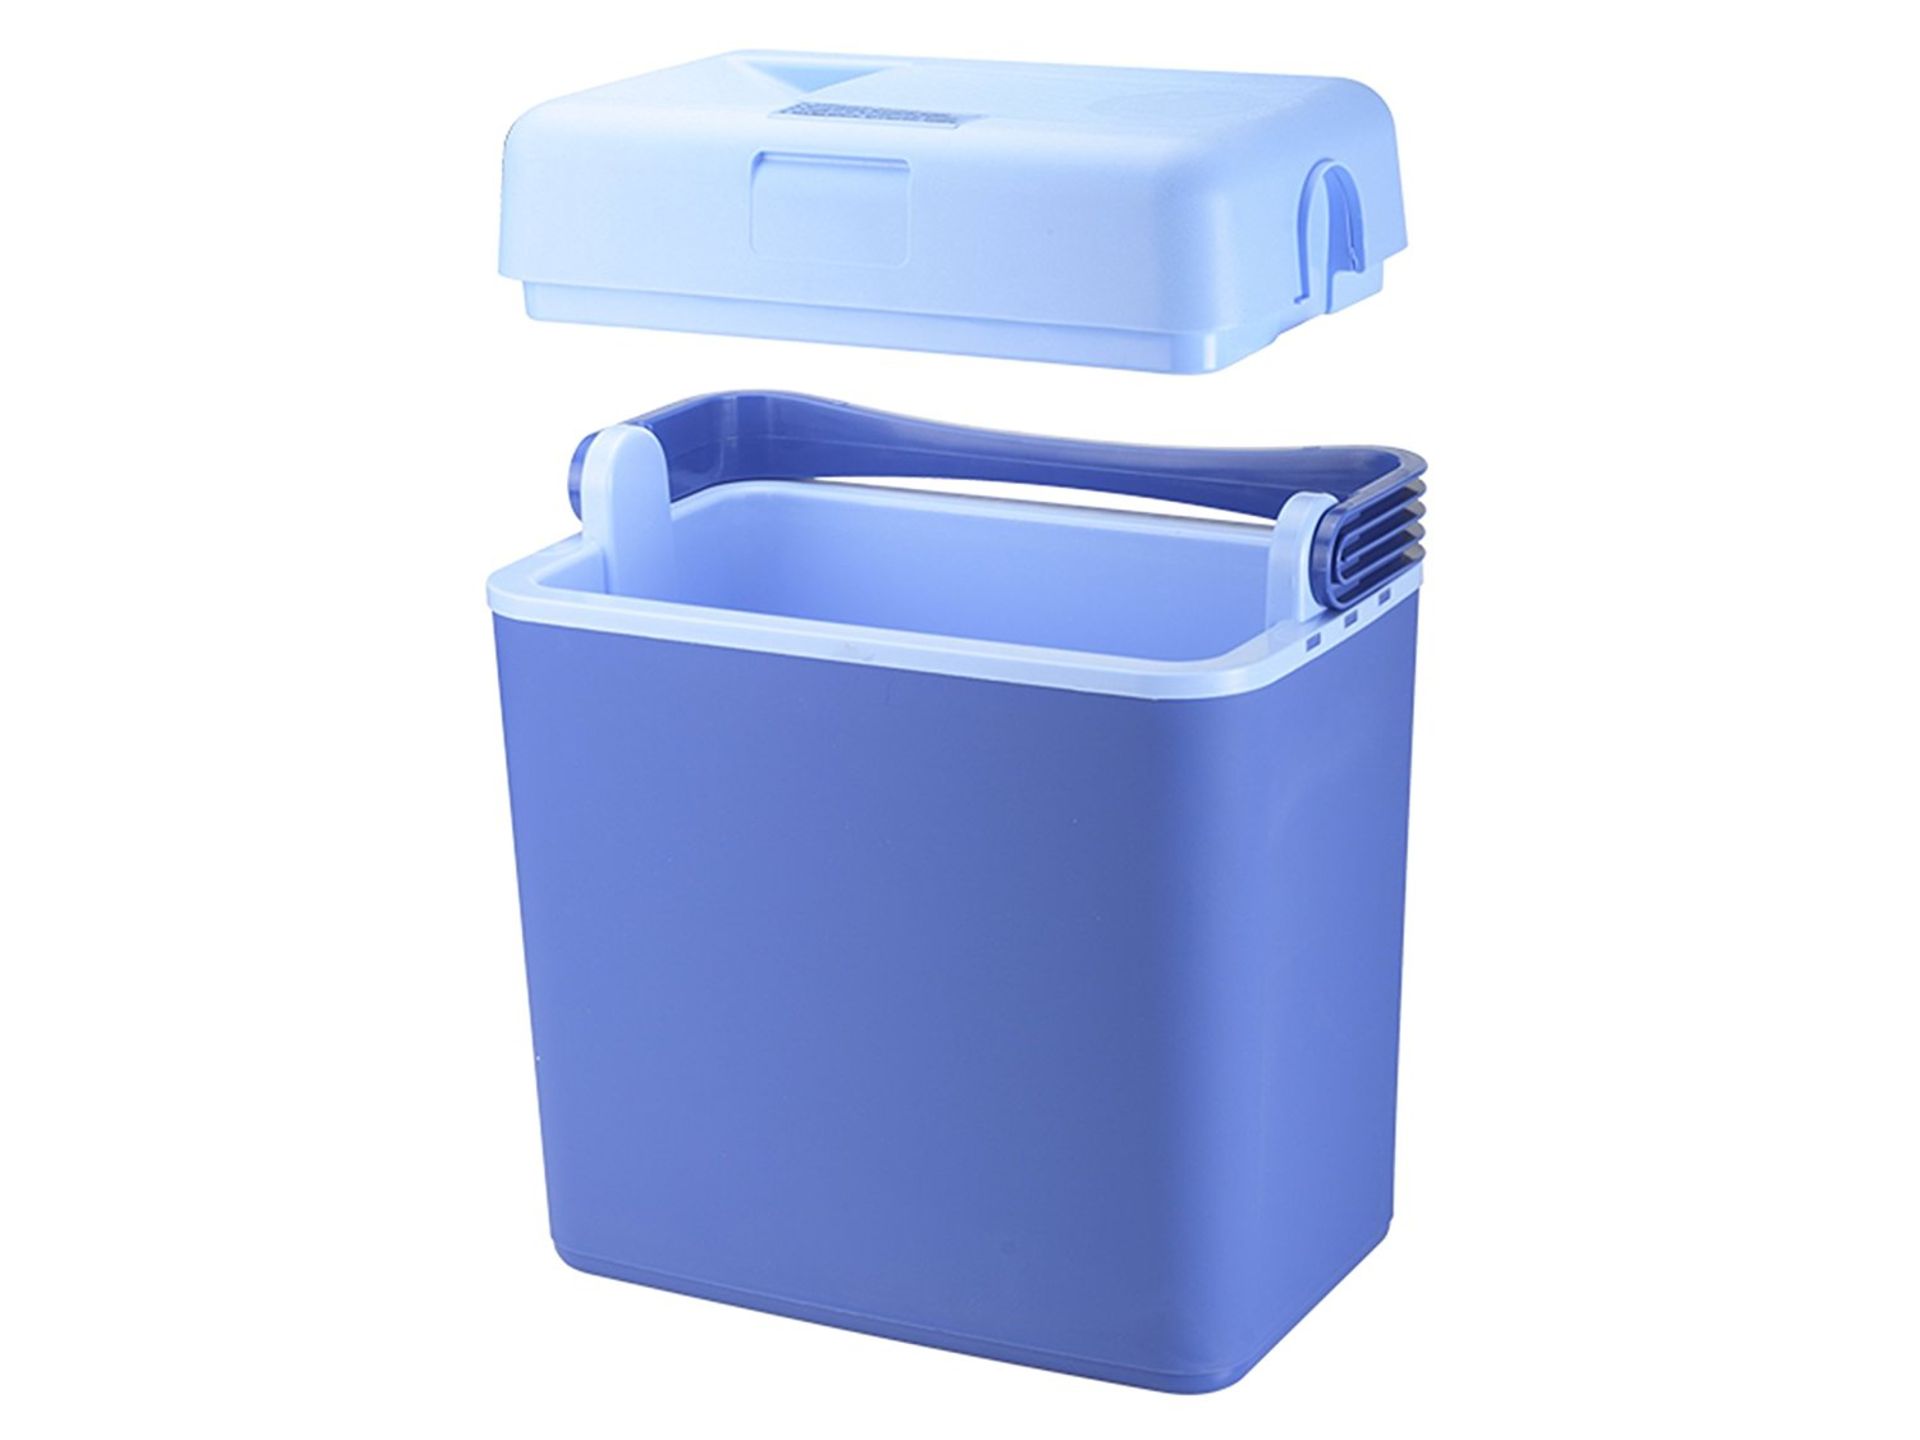 1 x Tristar Thermoelectric 24 Litre Lightweight Cool Box - Ideal For Camping, Picnics or - Image 7 of 8